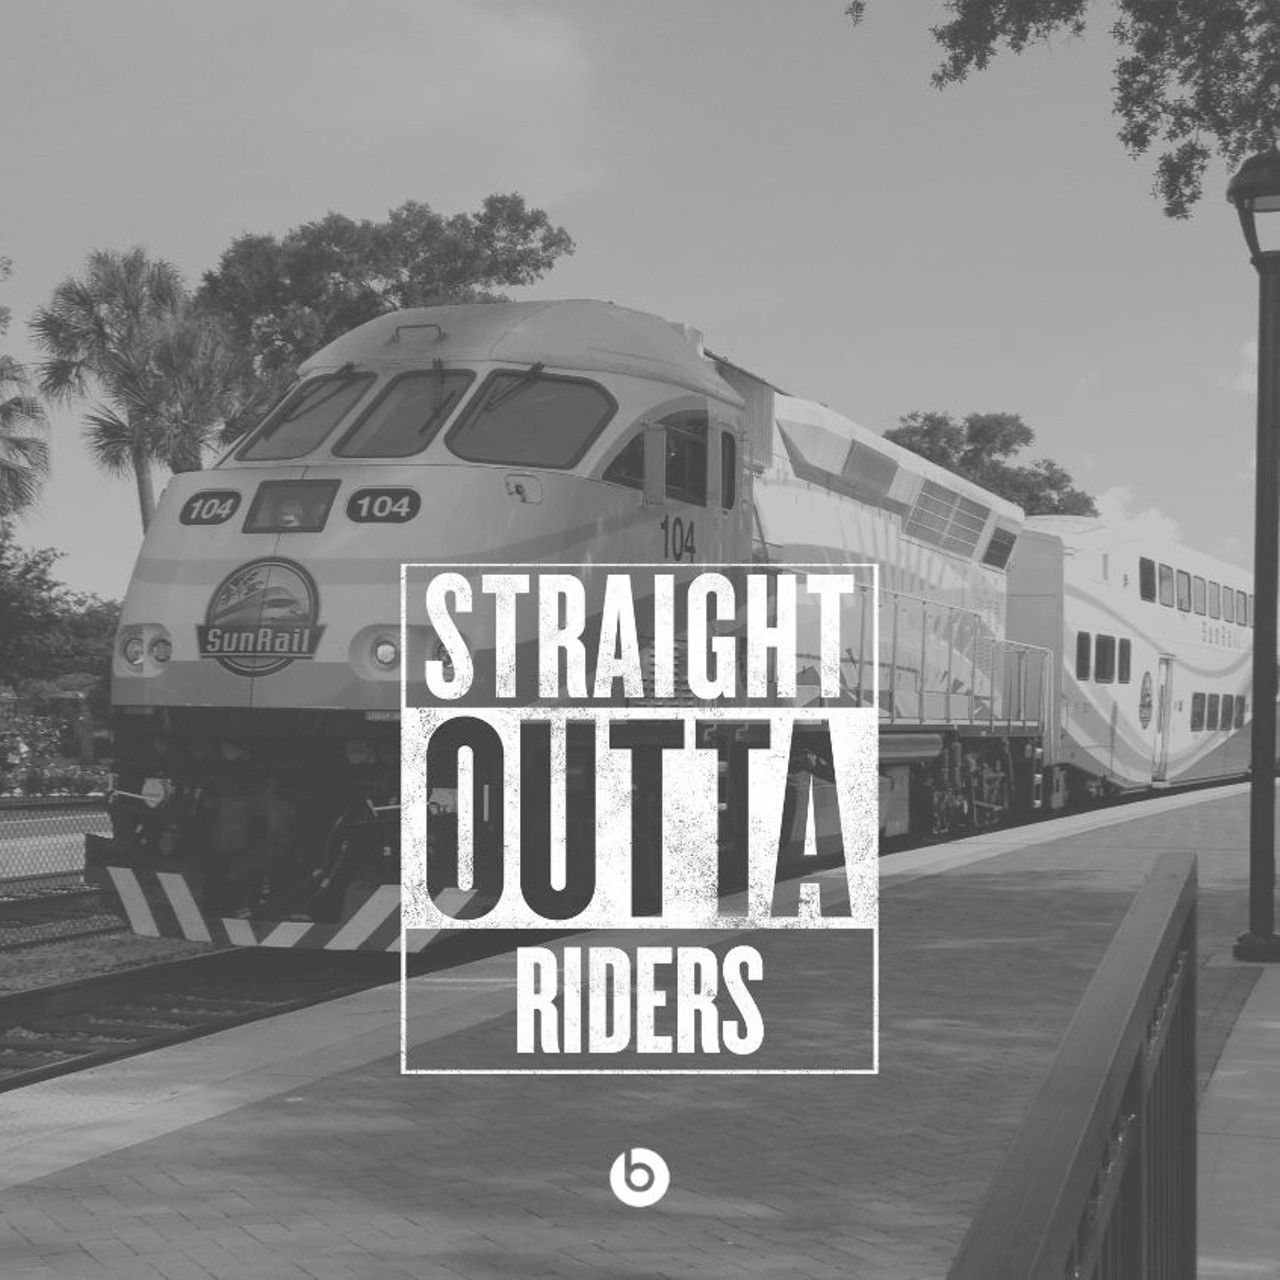 The 21 best Orlando-based "Straight Outta" memes